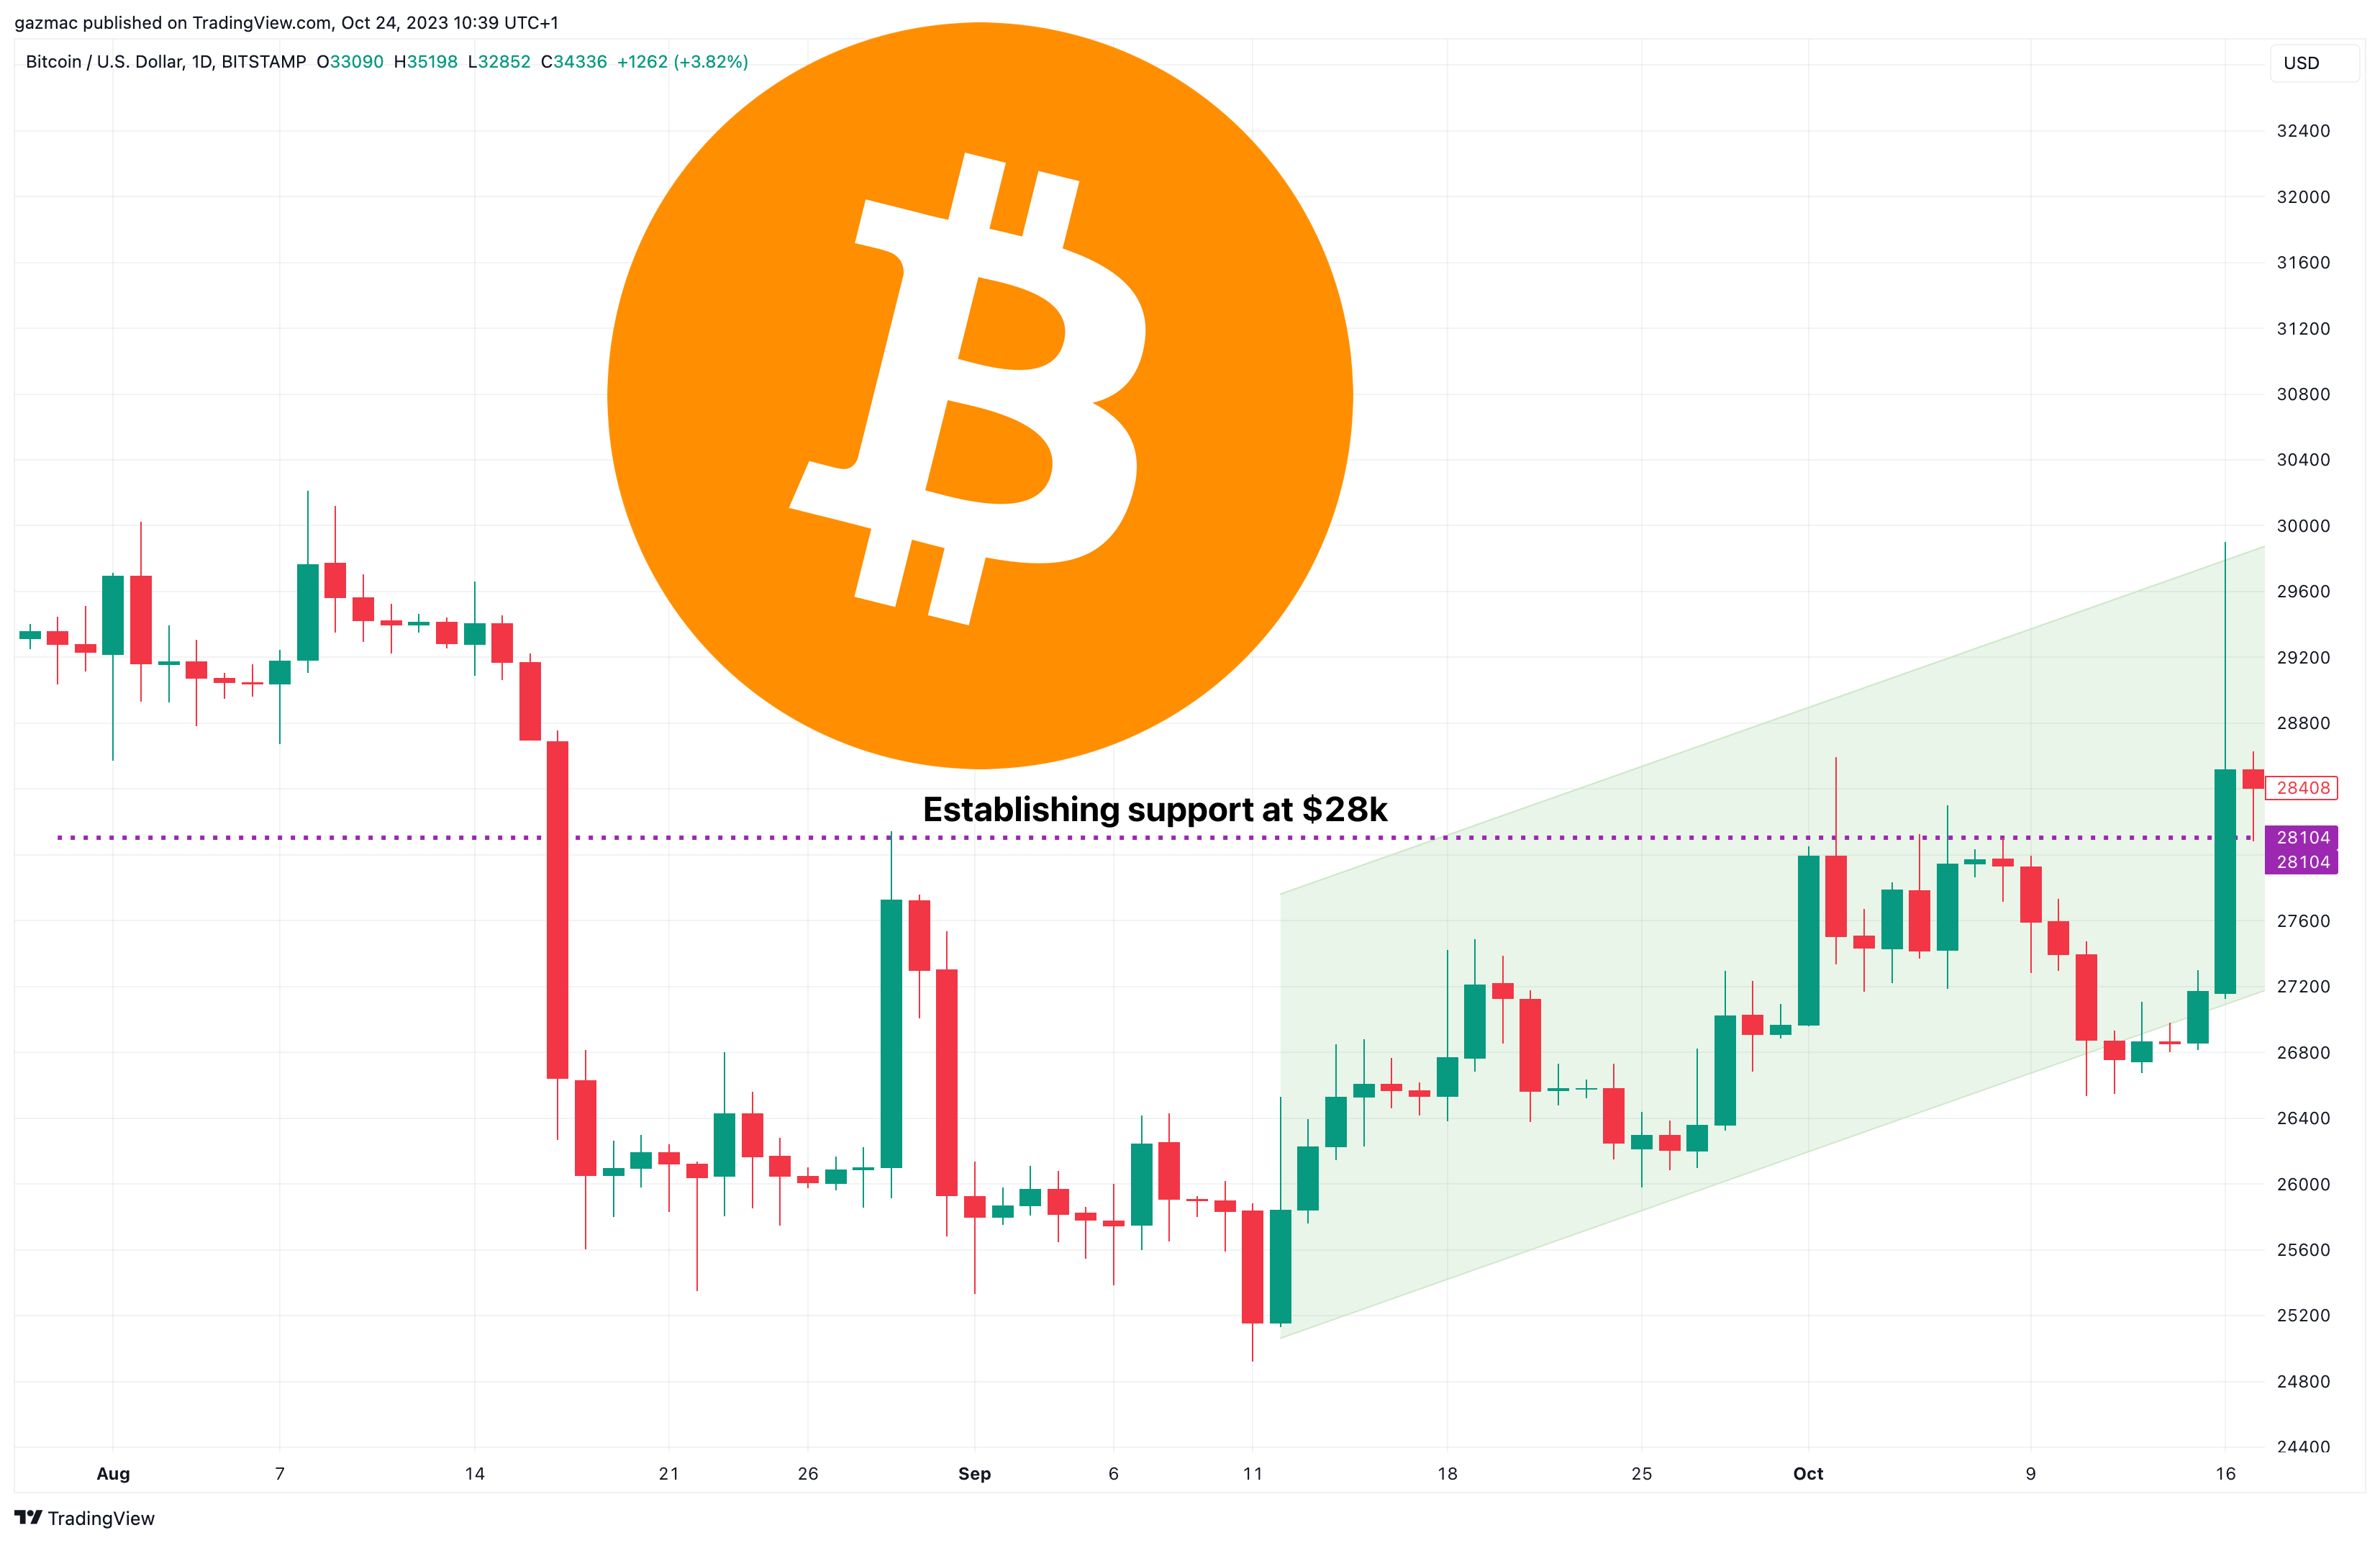 btcusd price chart - support at $28k